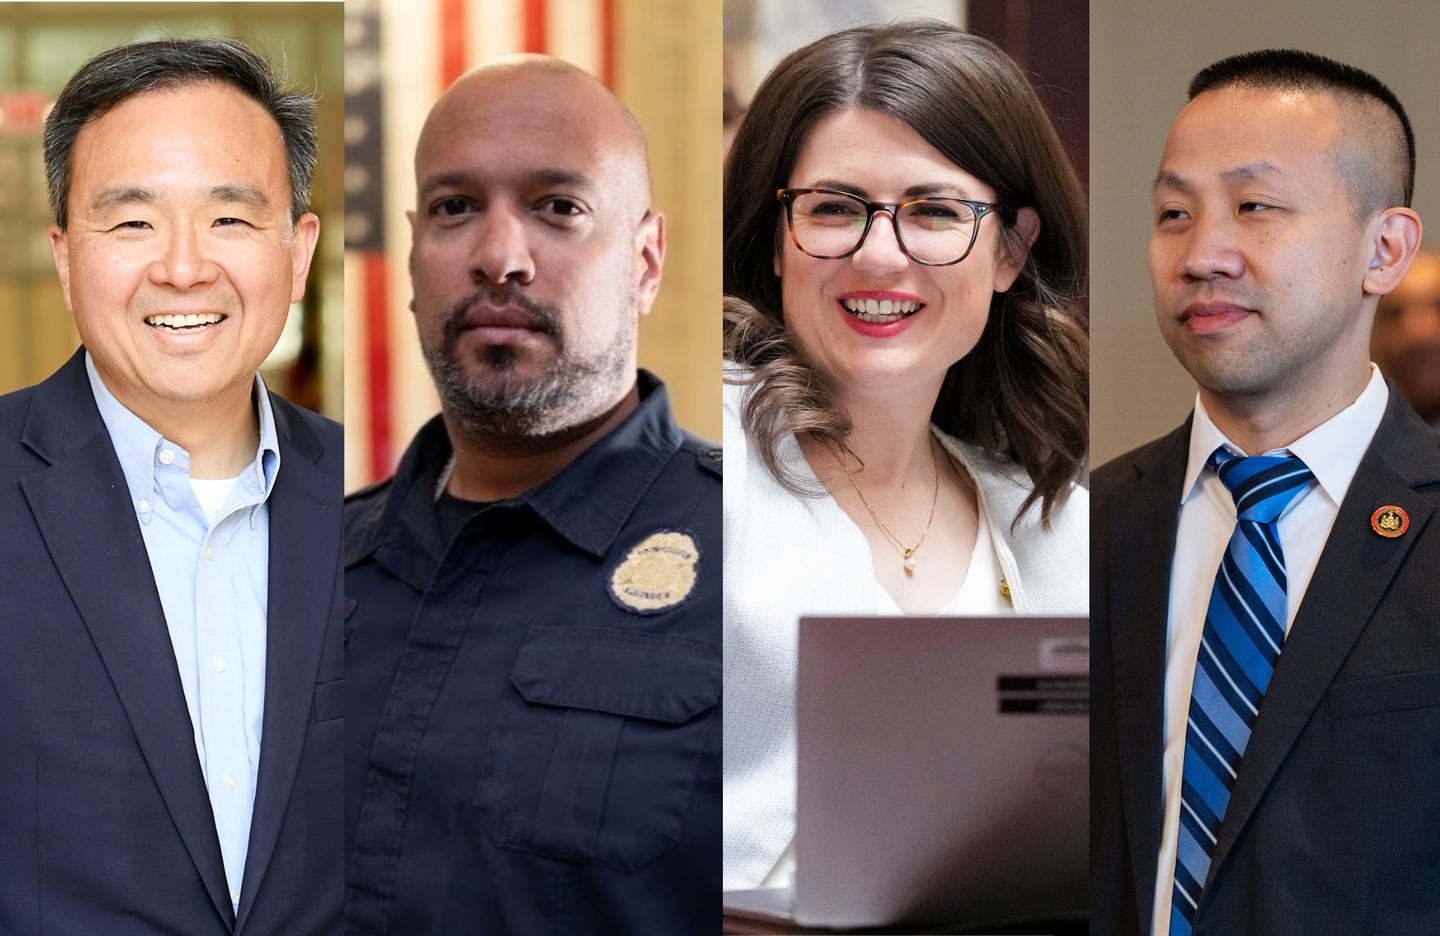 A composite photo of candidates for the 3rd Congressional District in Maryland (from left): Mark S. Chang, Harry Dunn, Sarah Elfreth and Clarence Lam.